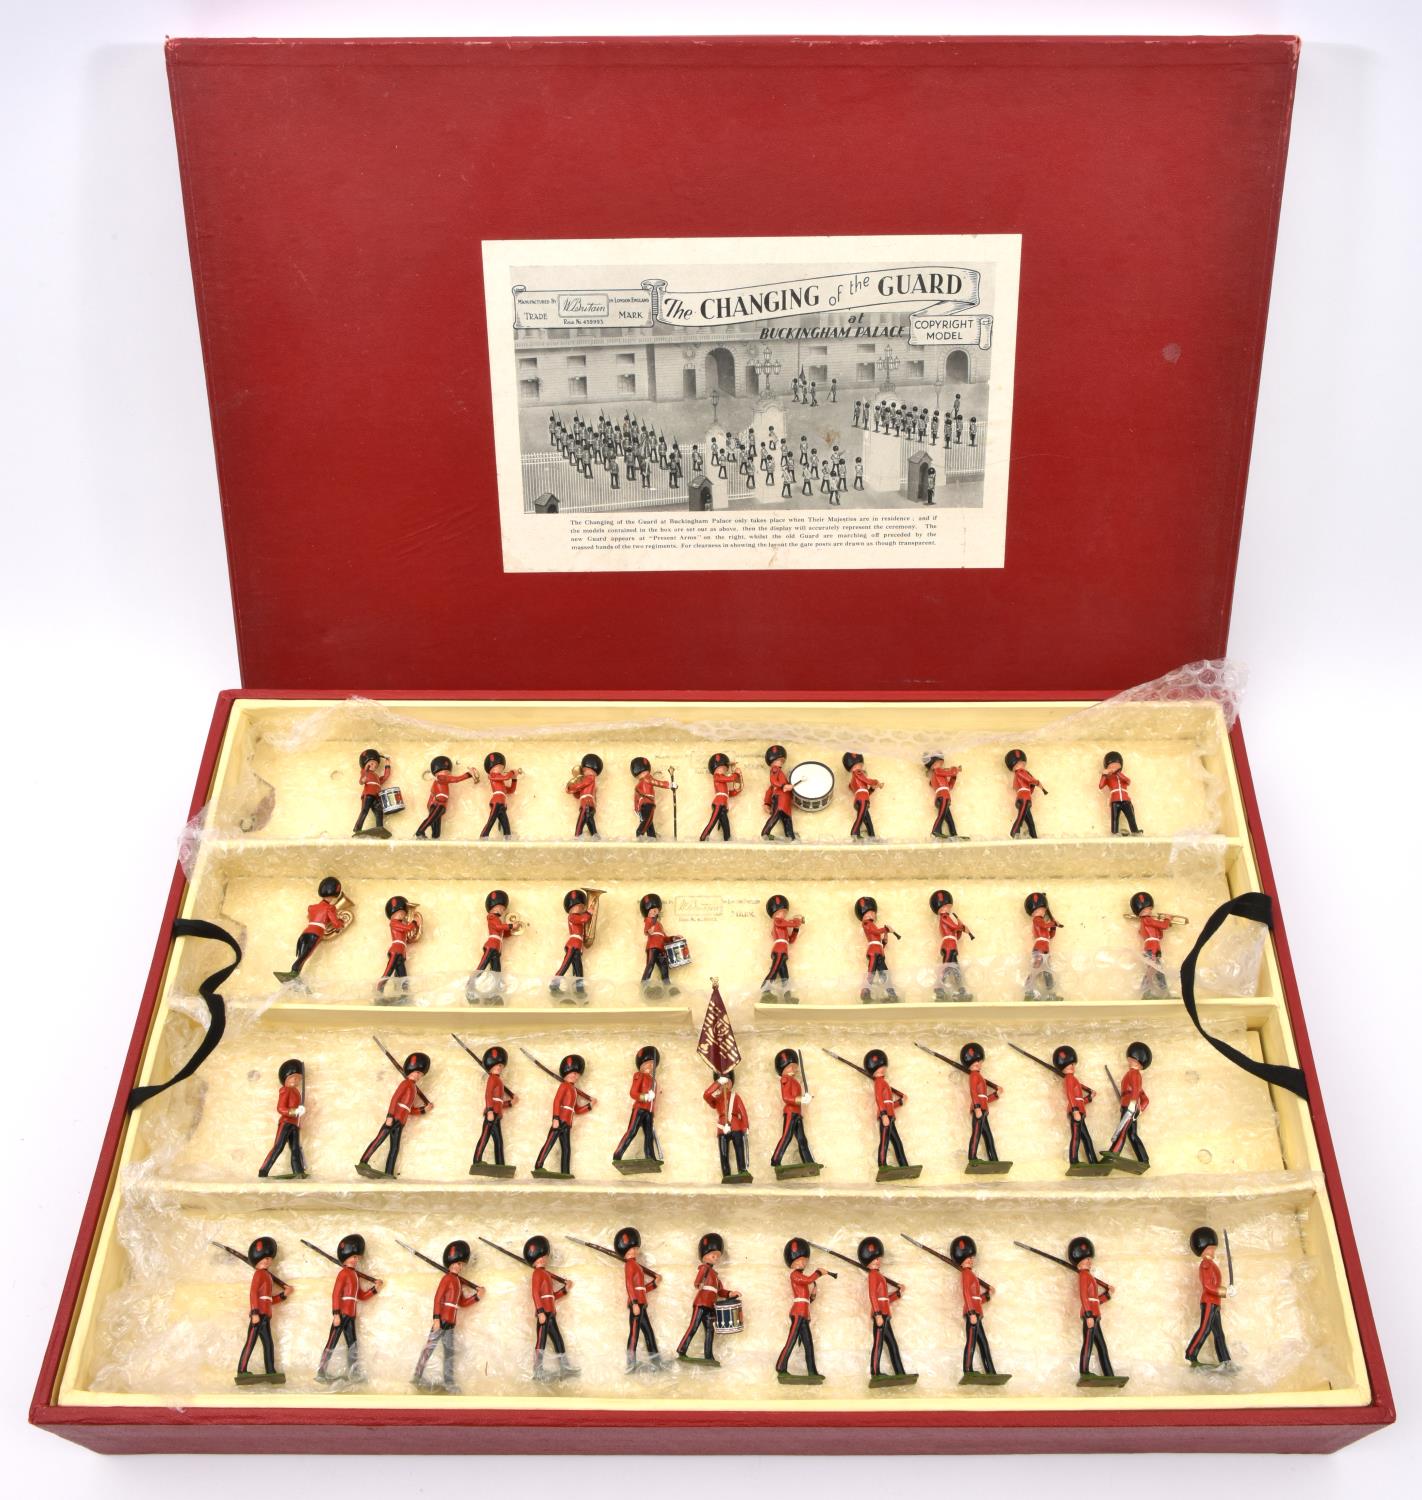 A scarce set of Britains 'The Changing of the Guard at Buckingham Palace' (Set No. 1555). This